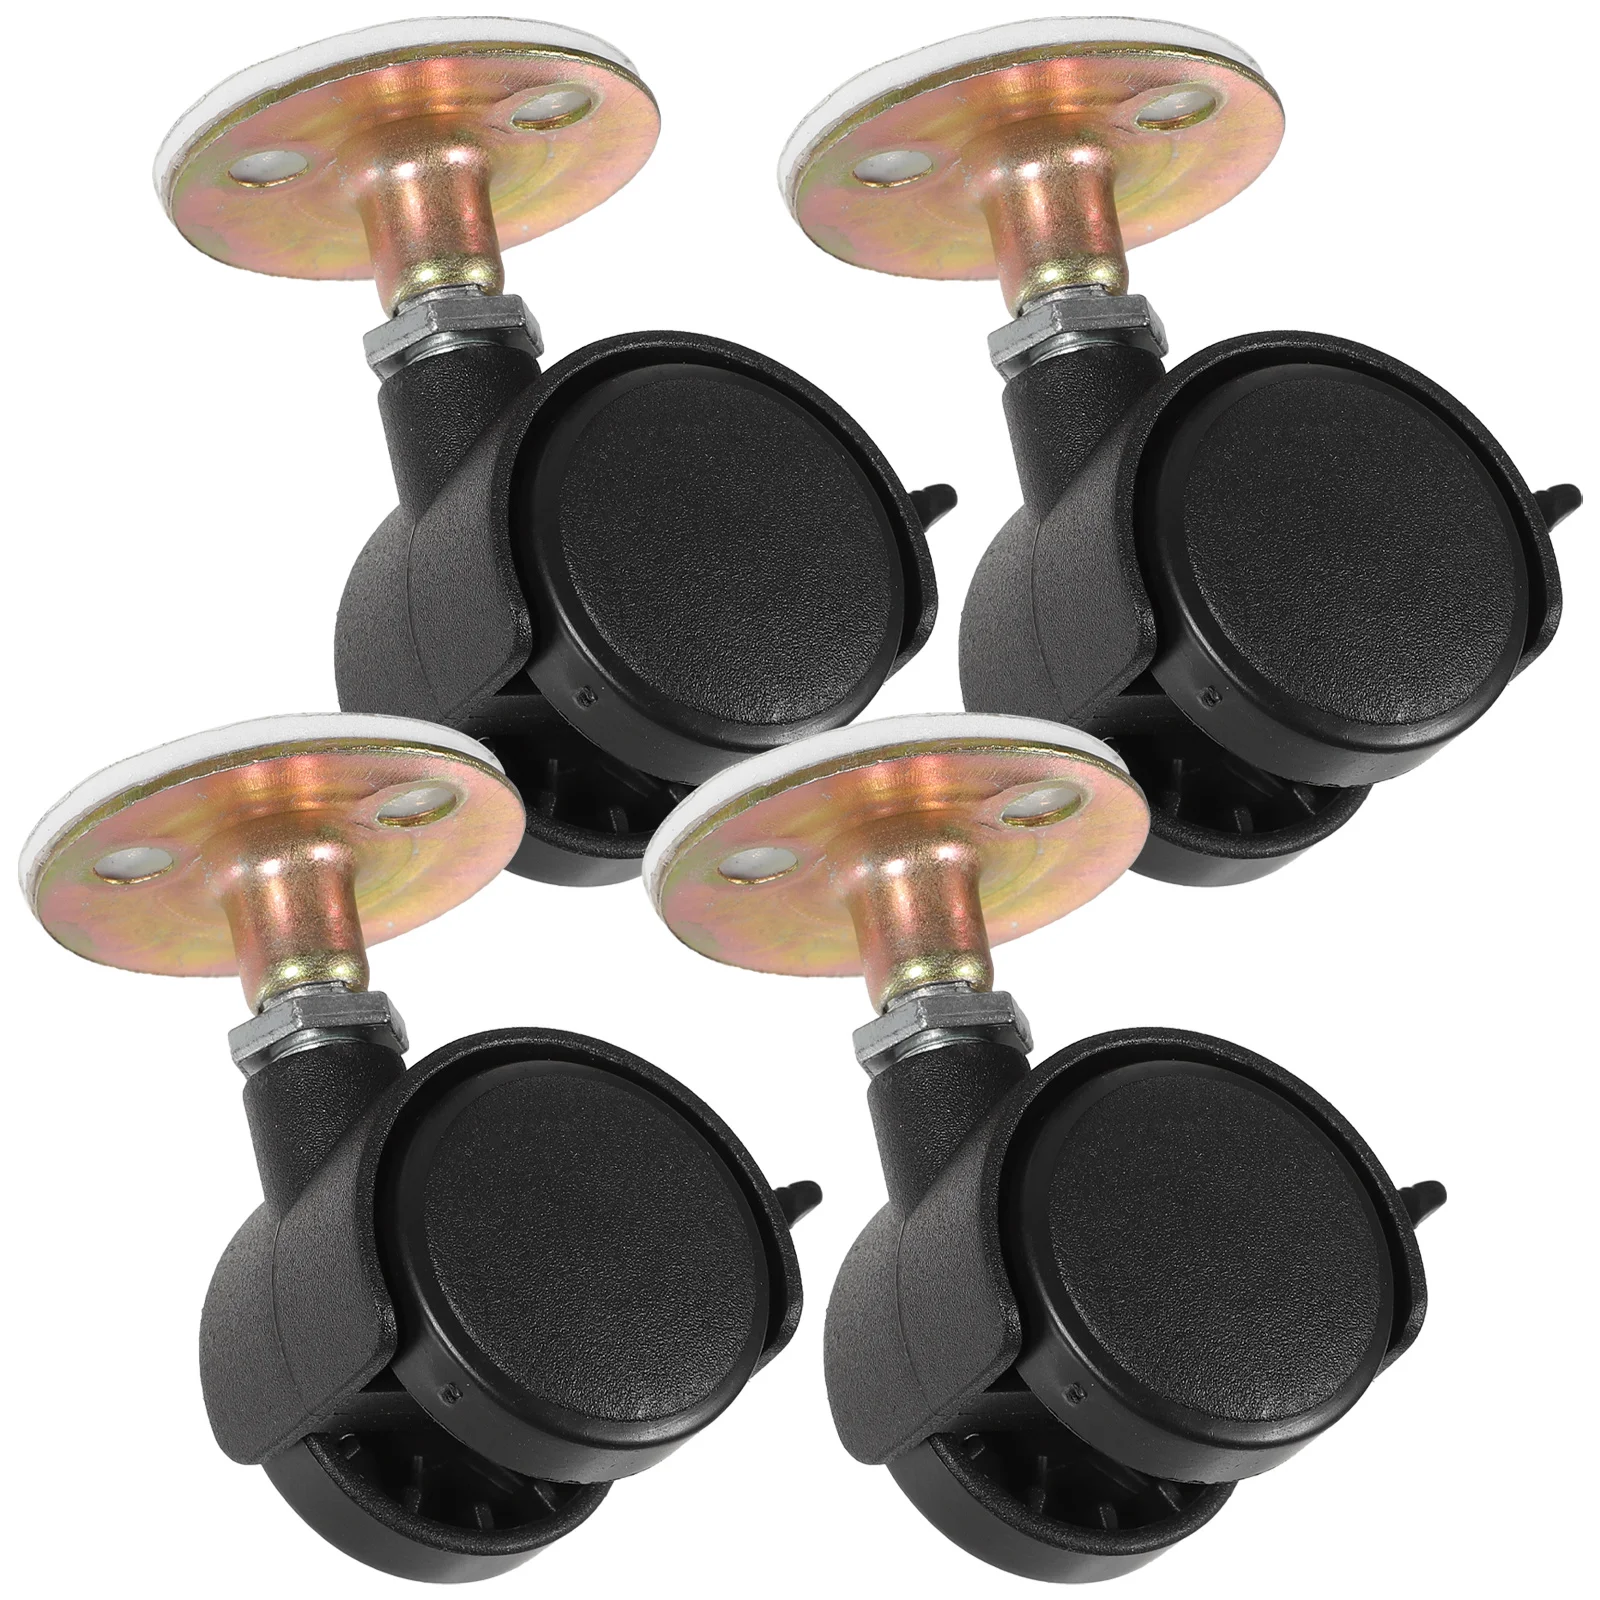 

4pcs Self Adhesive Caster Wheel 37mm 360 Degree Rotation Sticky Pulley Roller